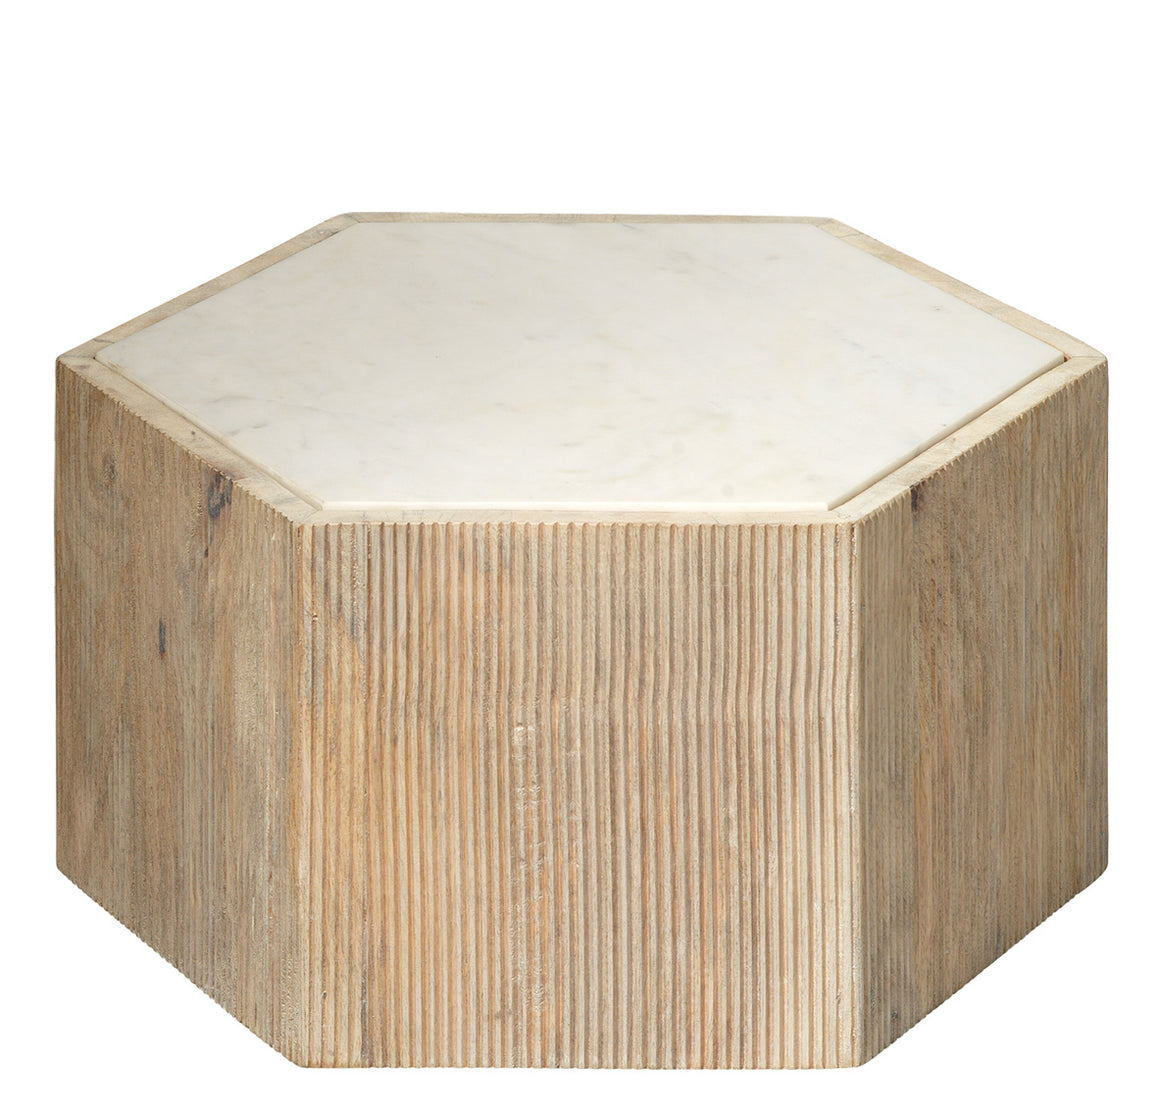 Small Argan Hexagon Table in Natural Wood & White Marble